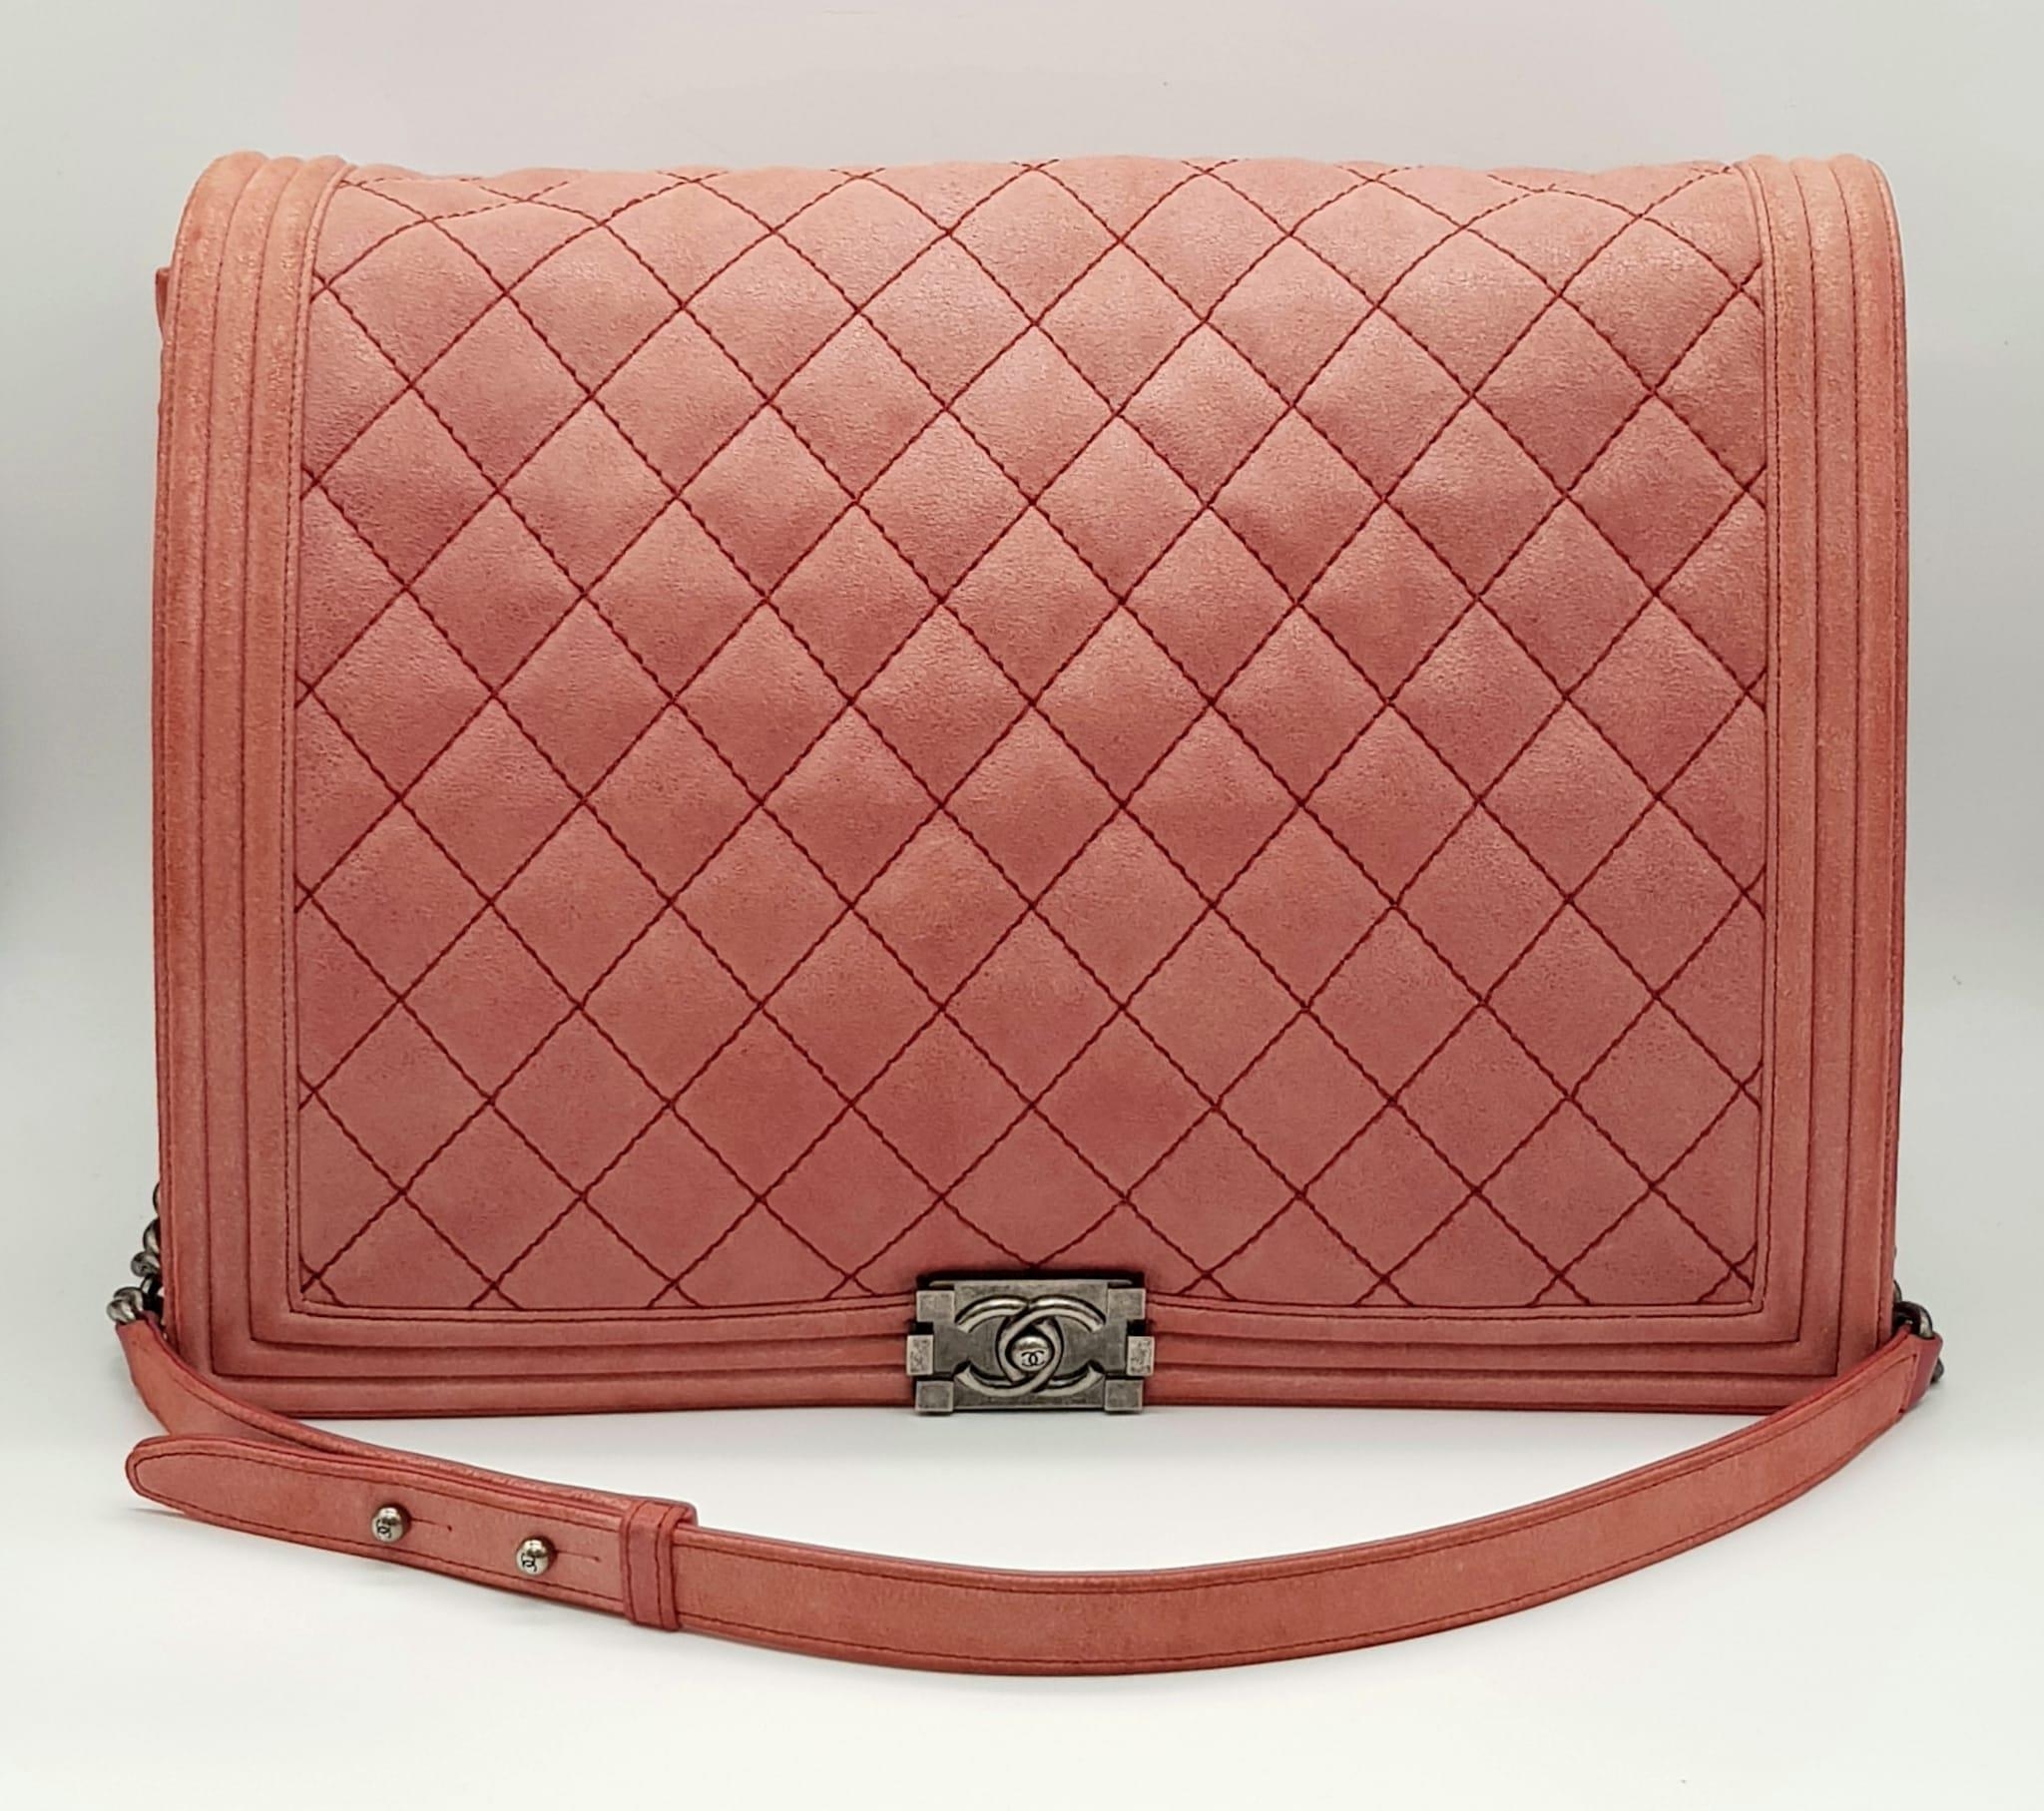 A Chanel Maxi Boy Shoulder Bag. Pink quilted suede flap on leather. Heavy brushed steel finish on